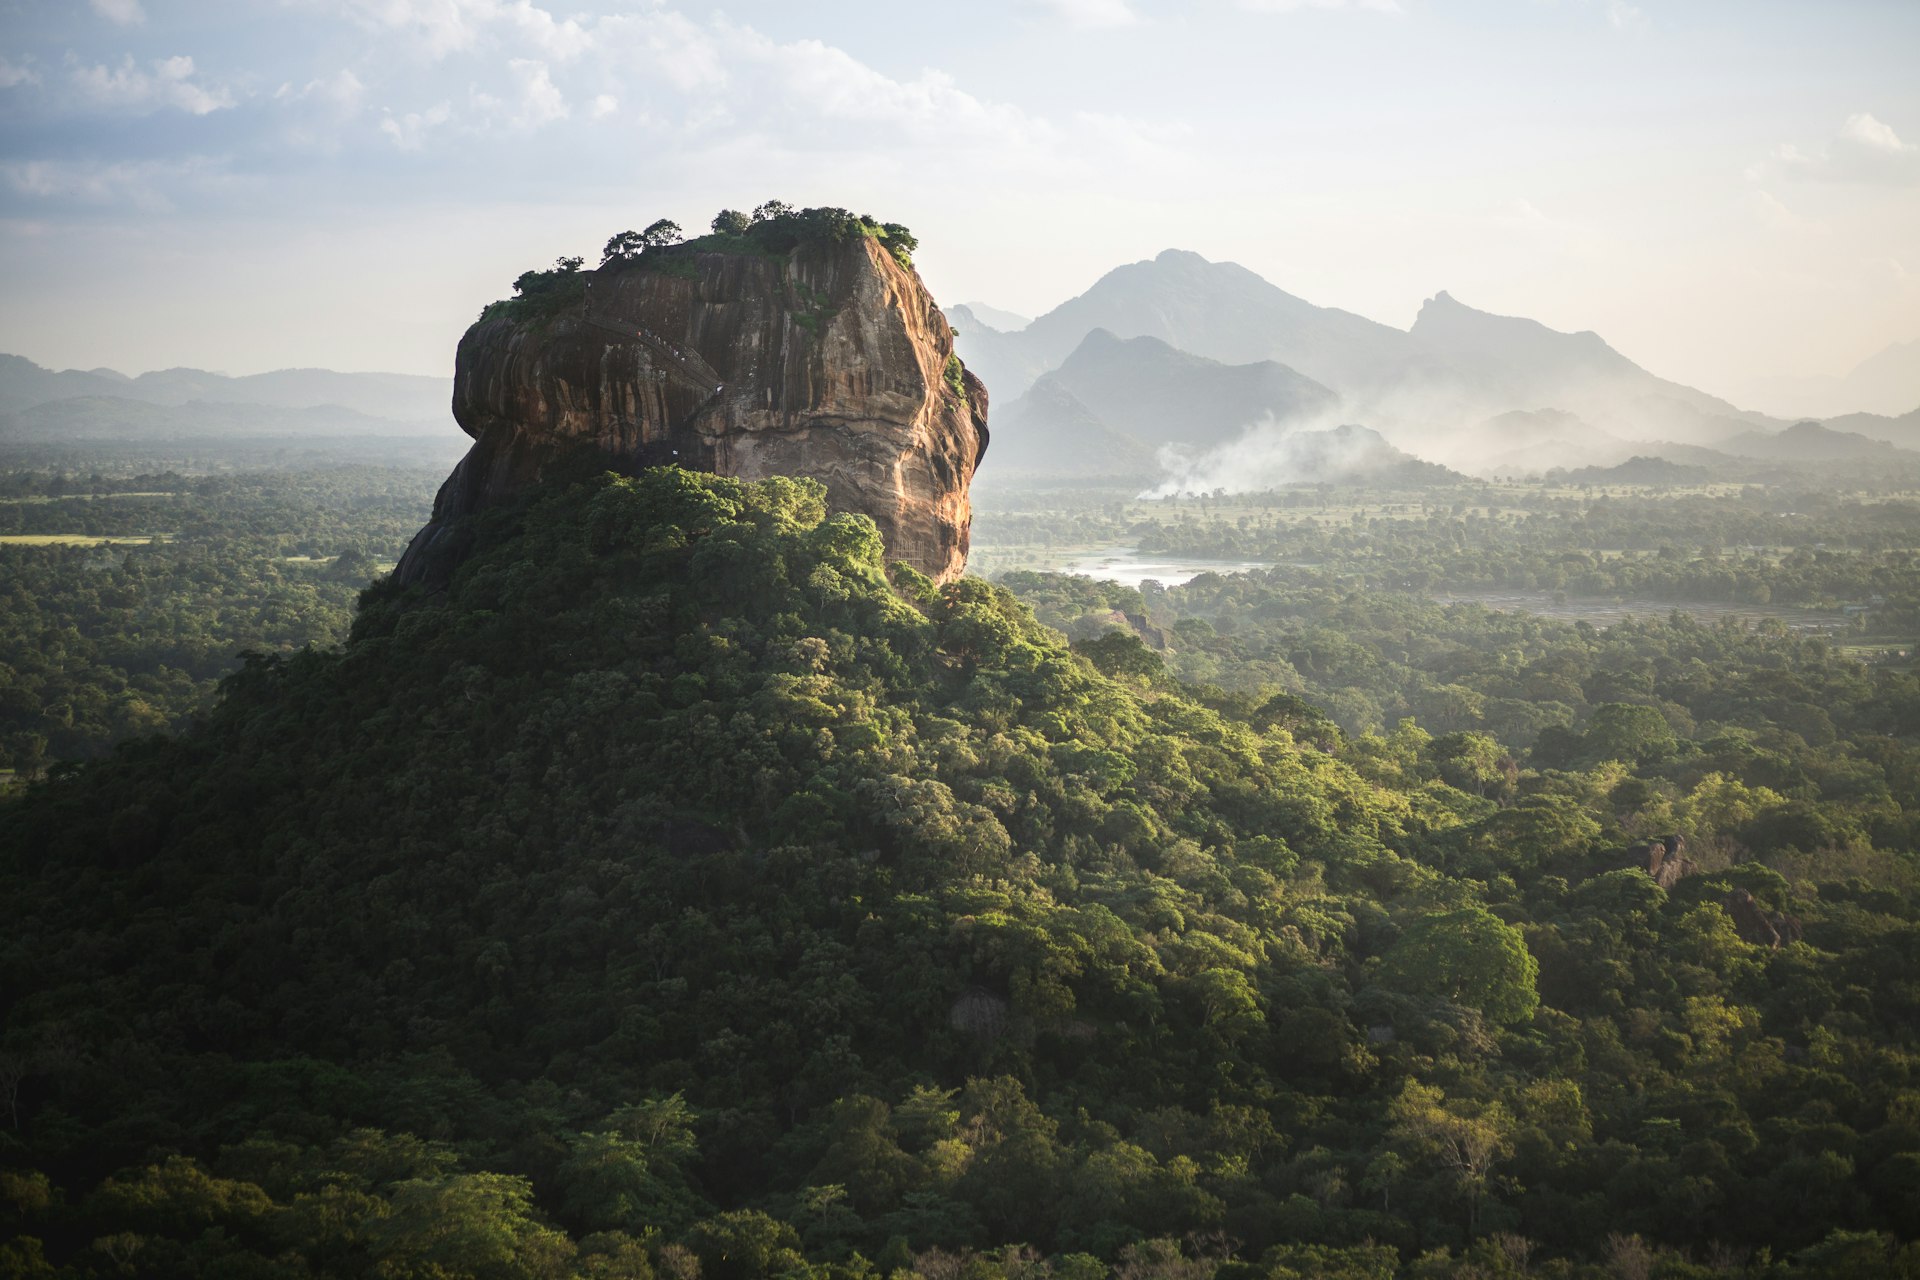 A wide angled view of Sigiriya, a huge rock in Sri Lanka that rises high from flat surrounds in the central region of the country.